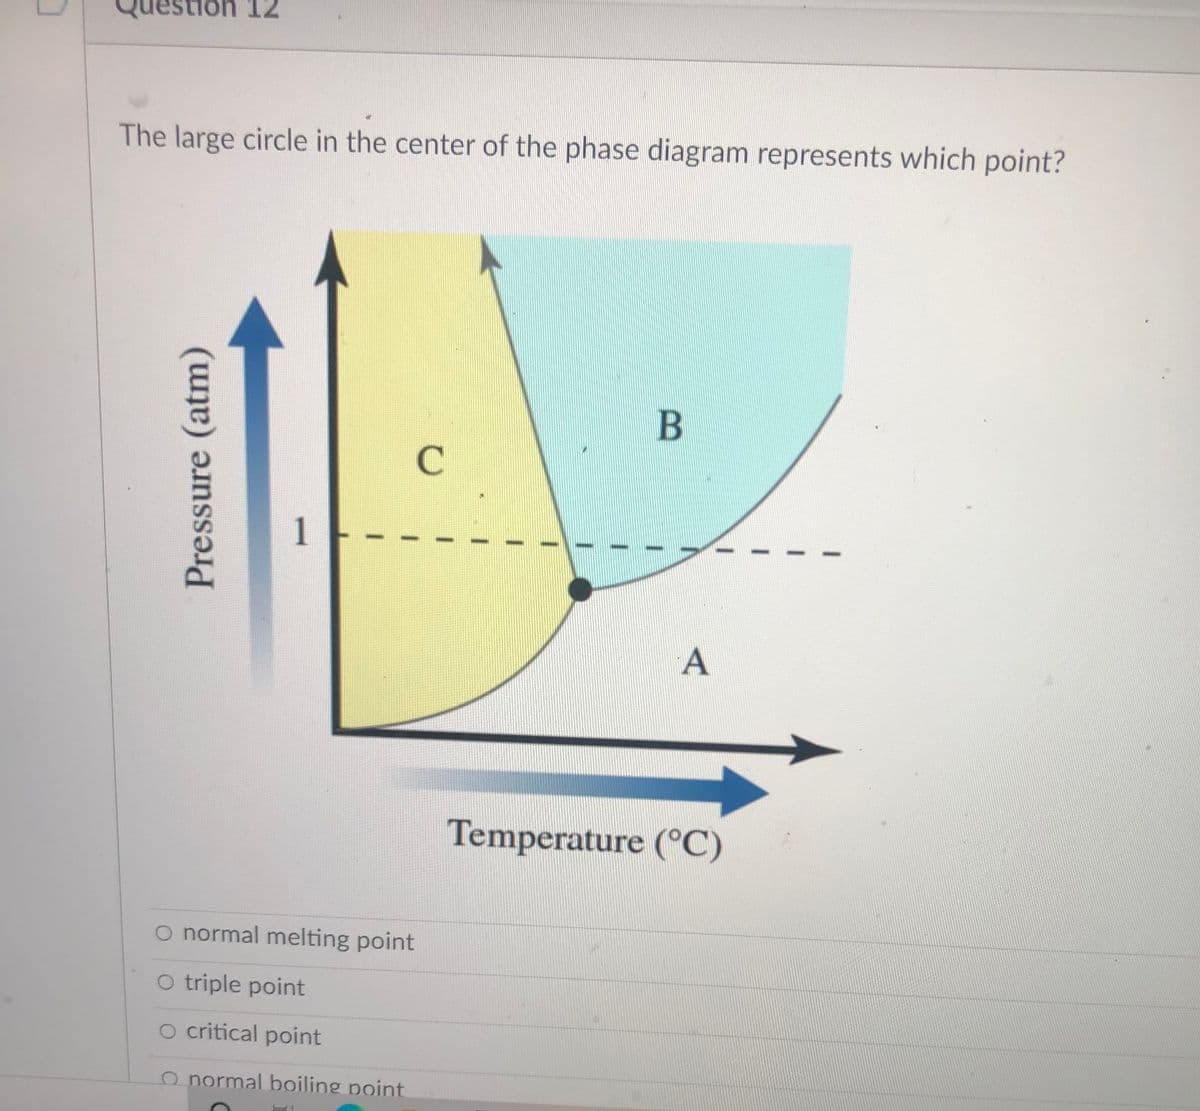 Question 12
The large circle in the center of the phase diagram represents which point?
C
1
A
Temperature (°C)
O normal melting point
O triple point
O critical point
O normal boiling point
Pressure (atm)
